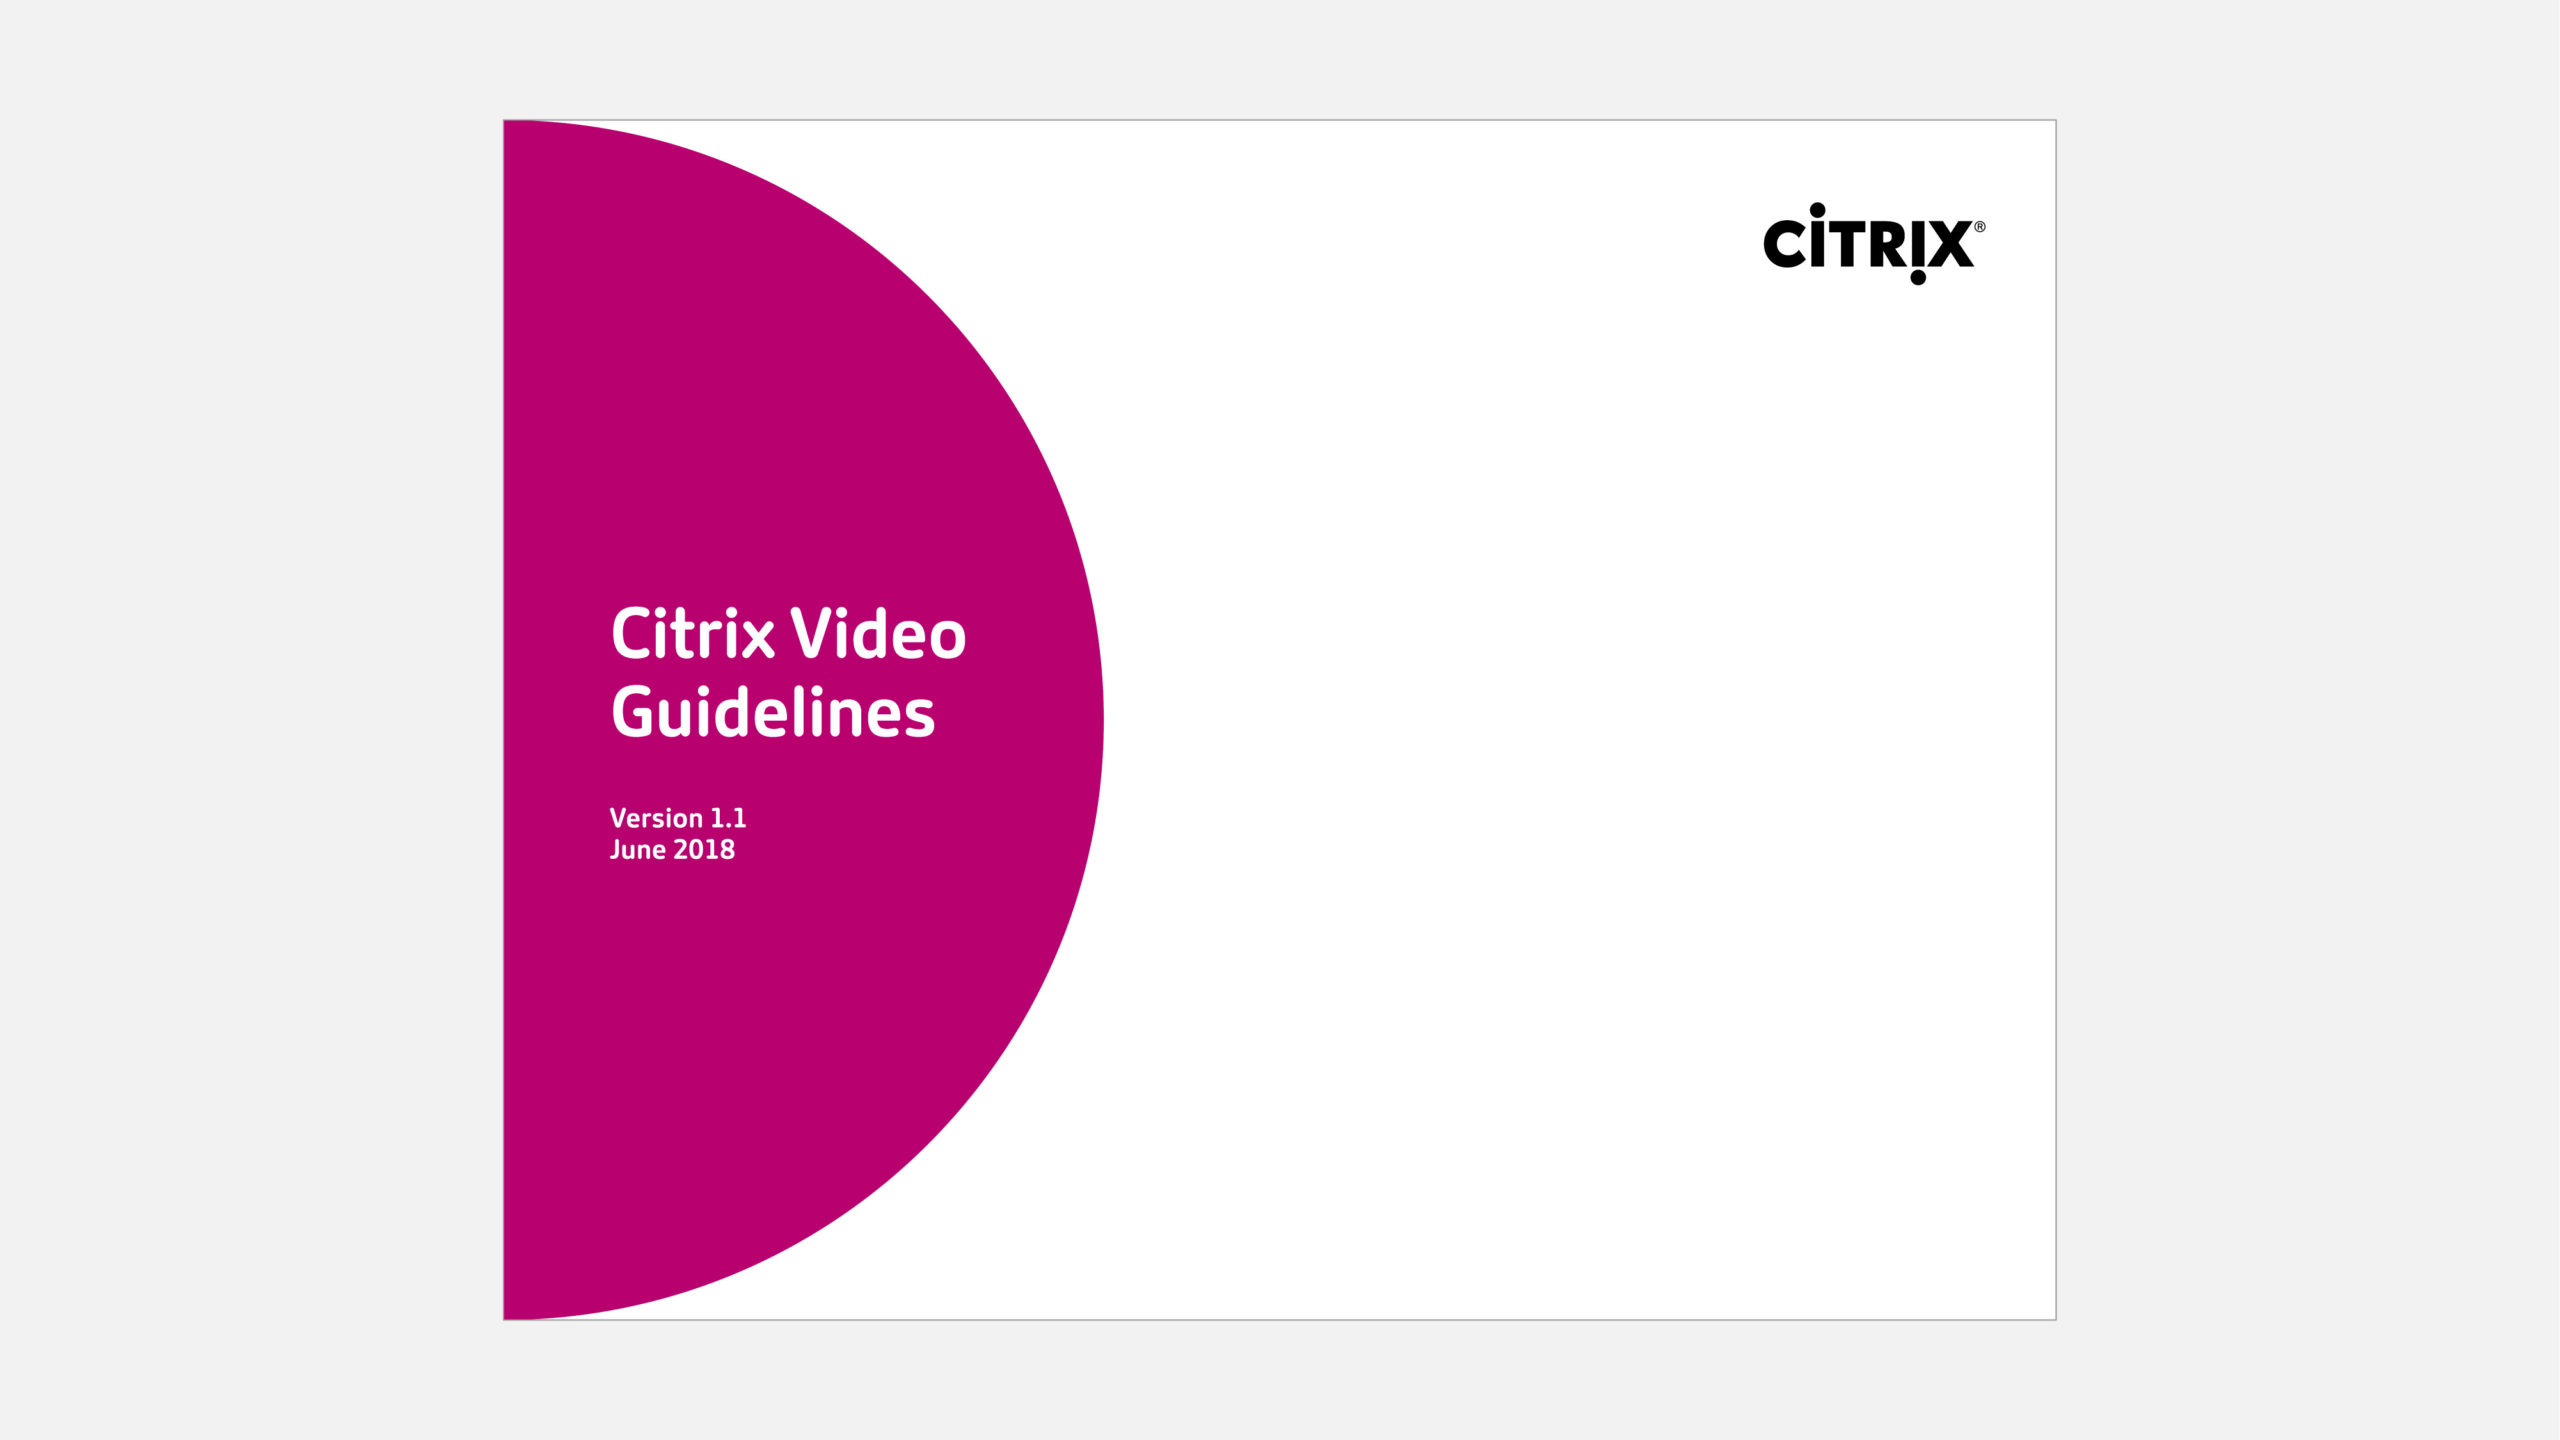 Video guidelines